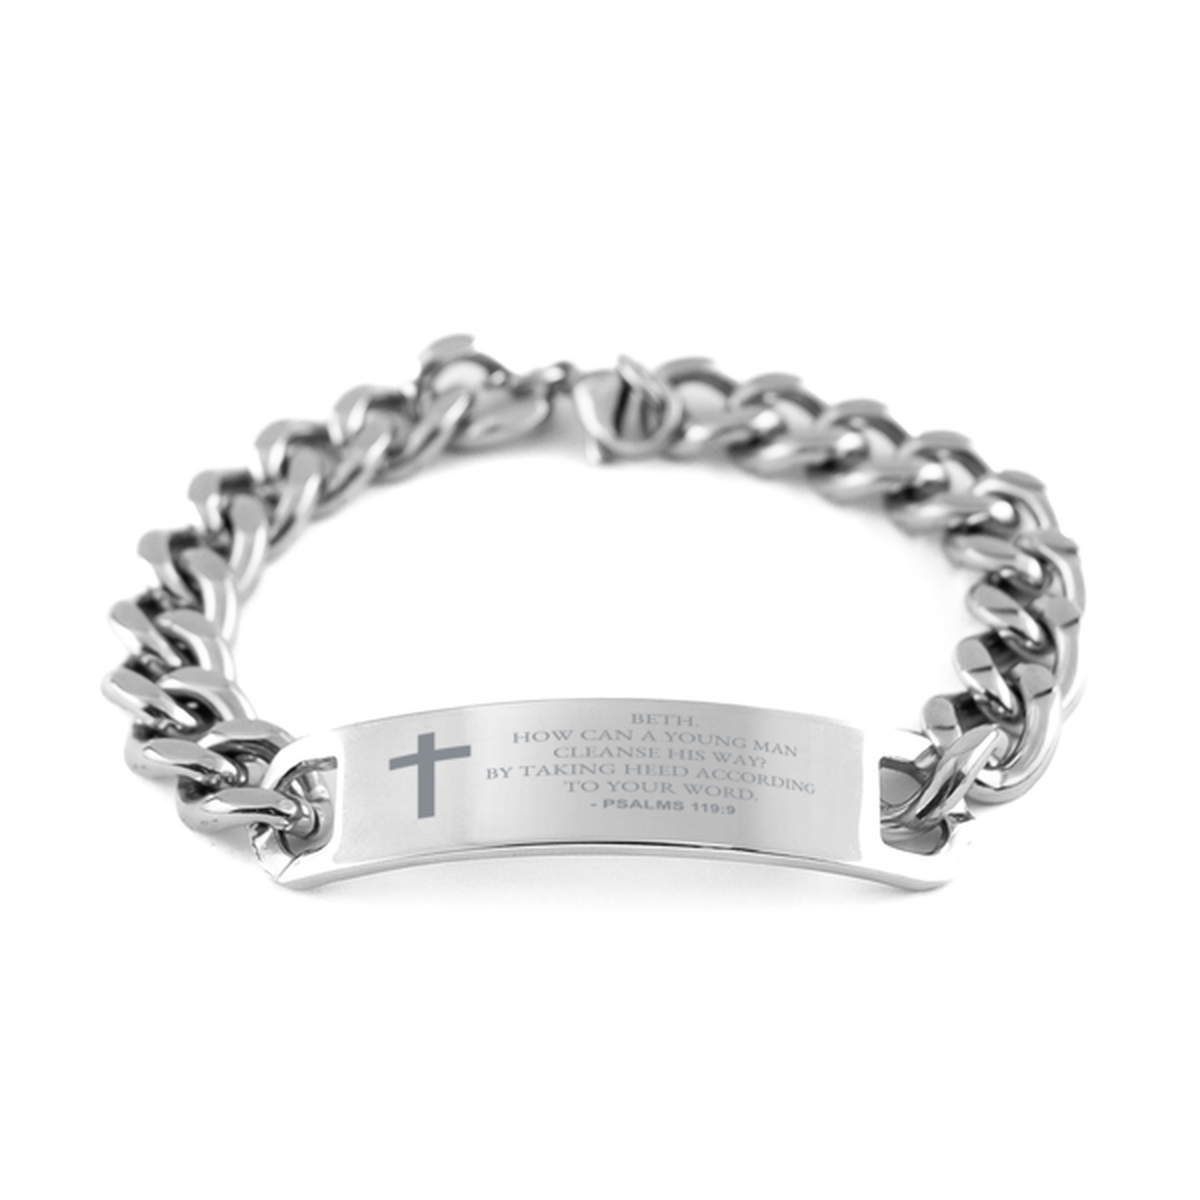 Bible Verse Chain Stainless Steel Bracelet, Psalms 119:9 Beth. How Can A Young Man Cleanse His Way? By, Inspirational Christian Gifts For Men Women